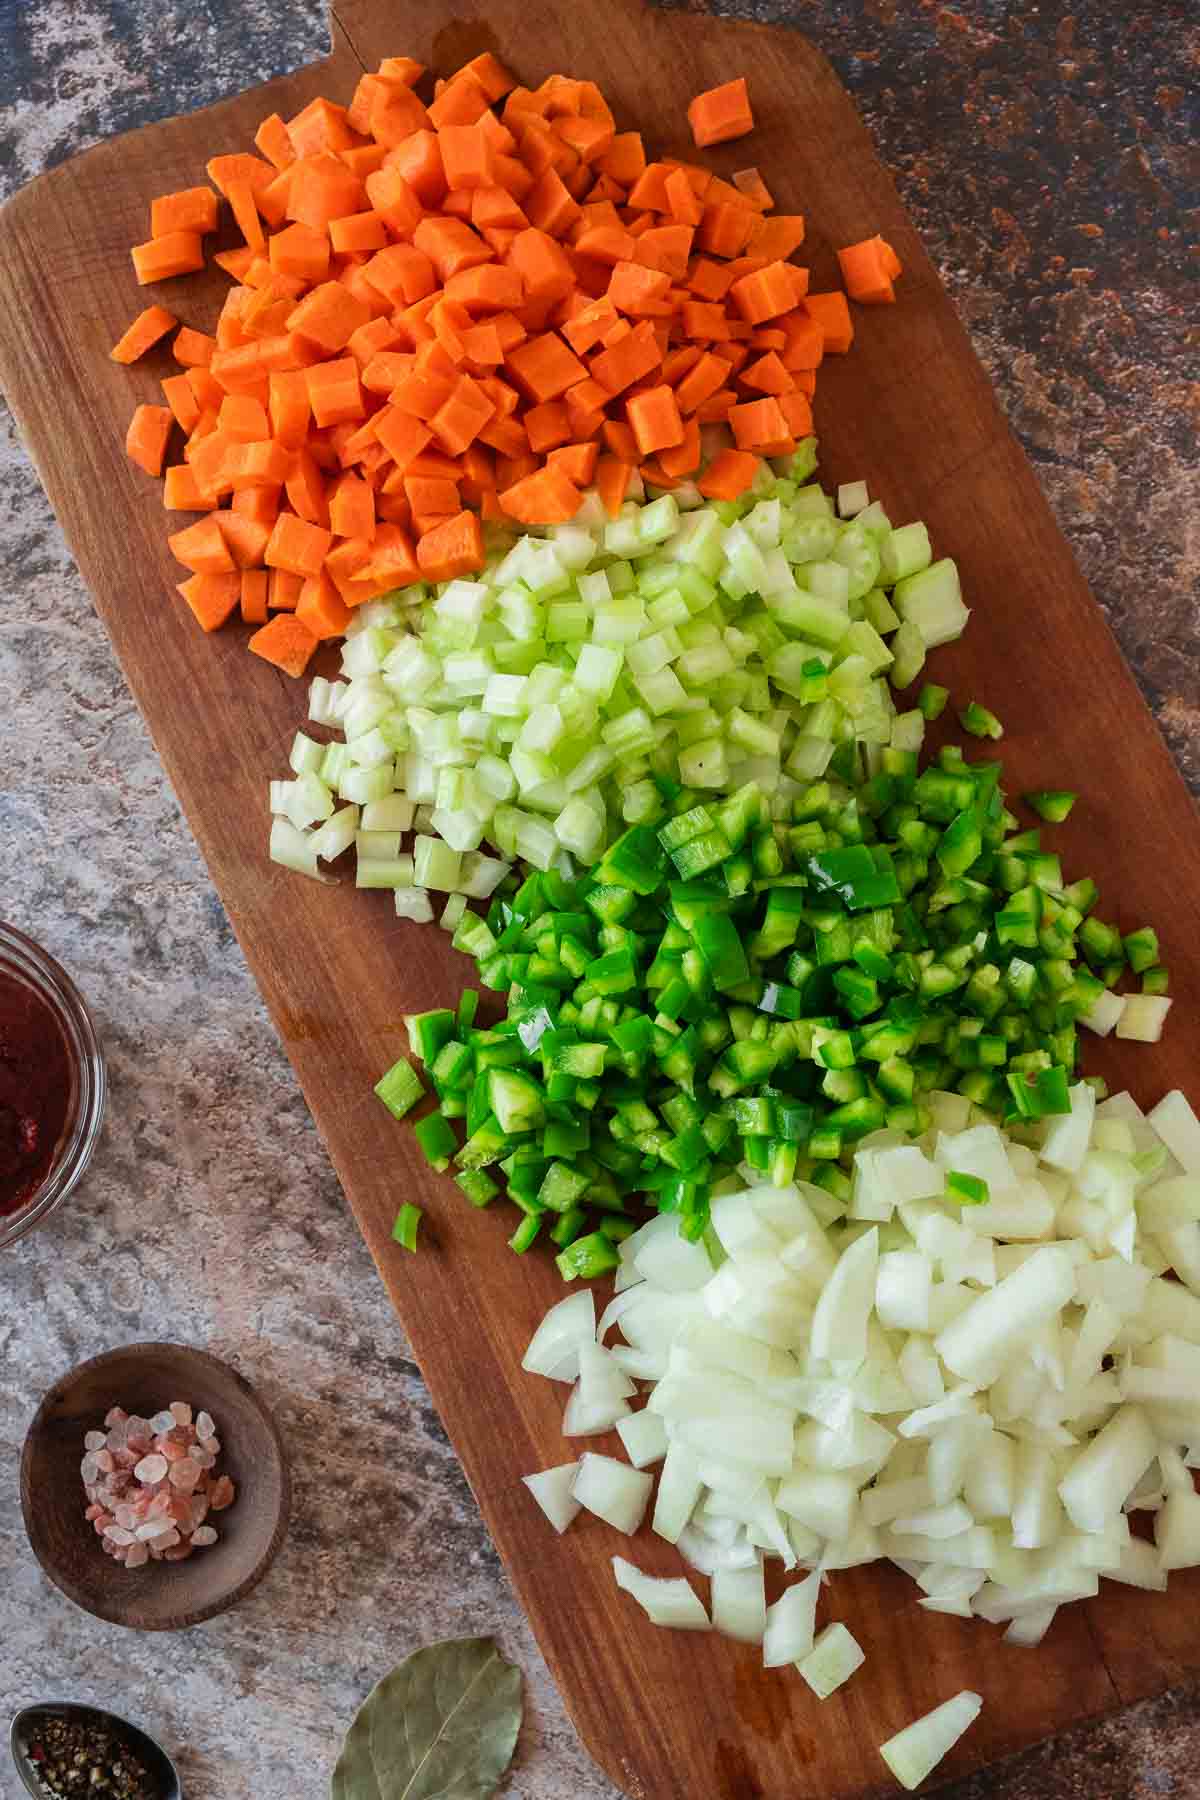 Diced and prepped vegetables on a wooden board.